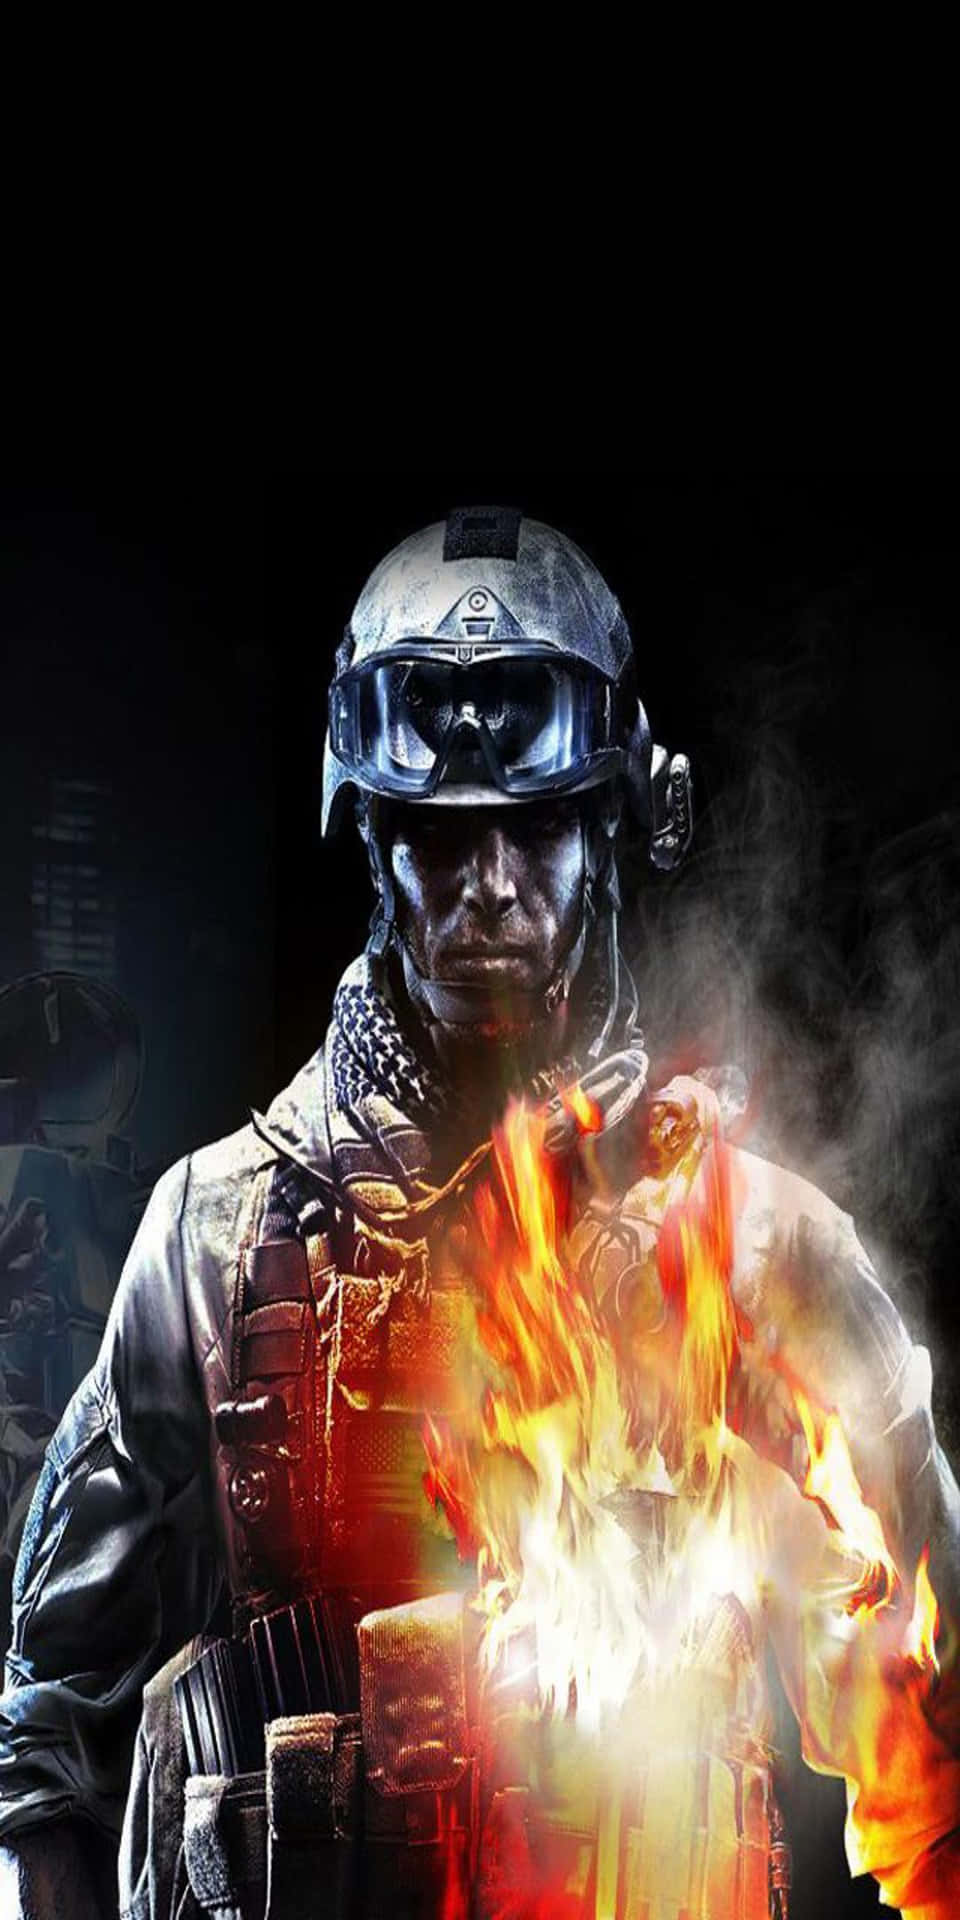 A Soldier In A Helmet With Fire In His Hands